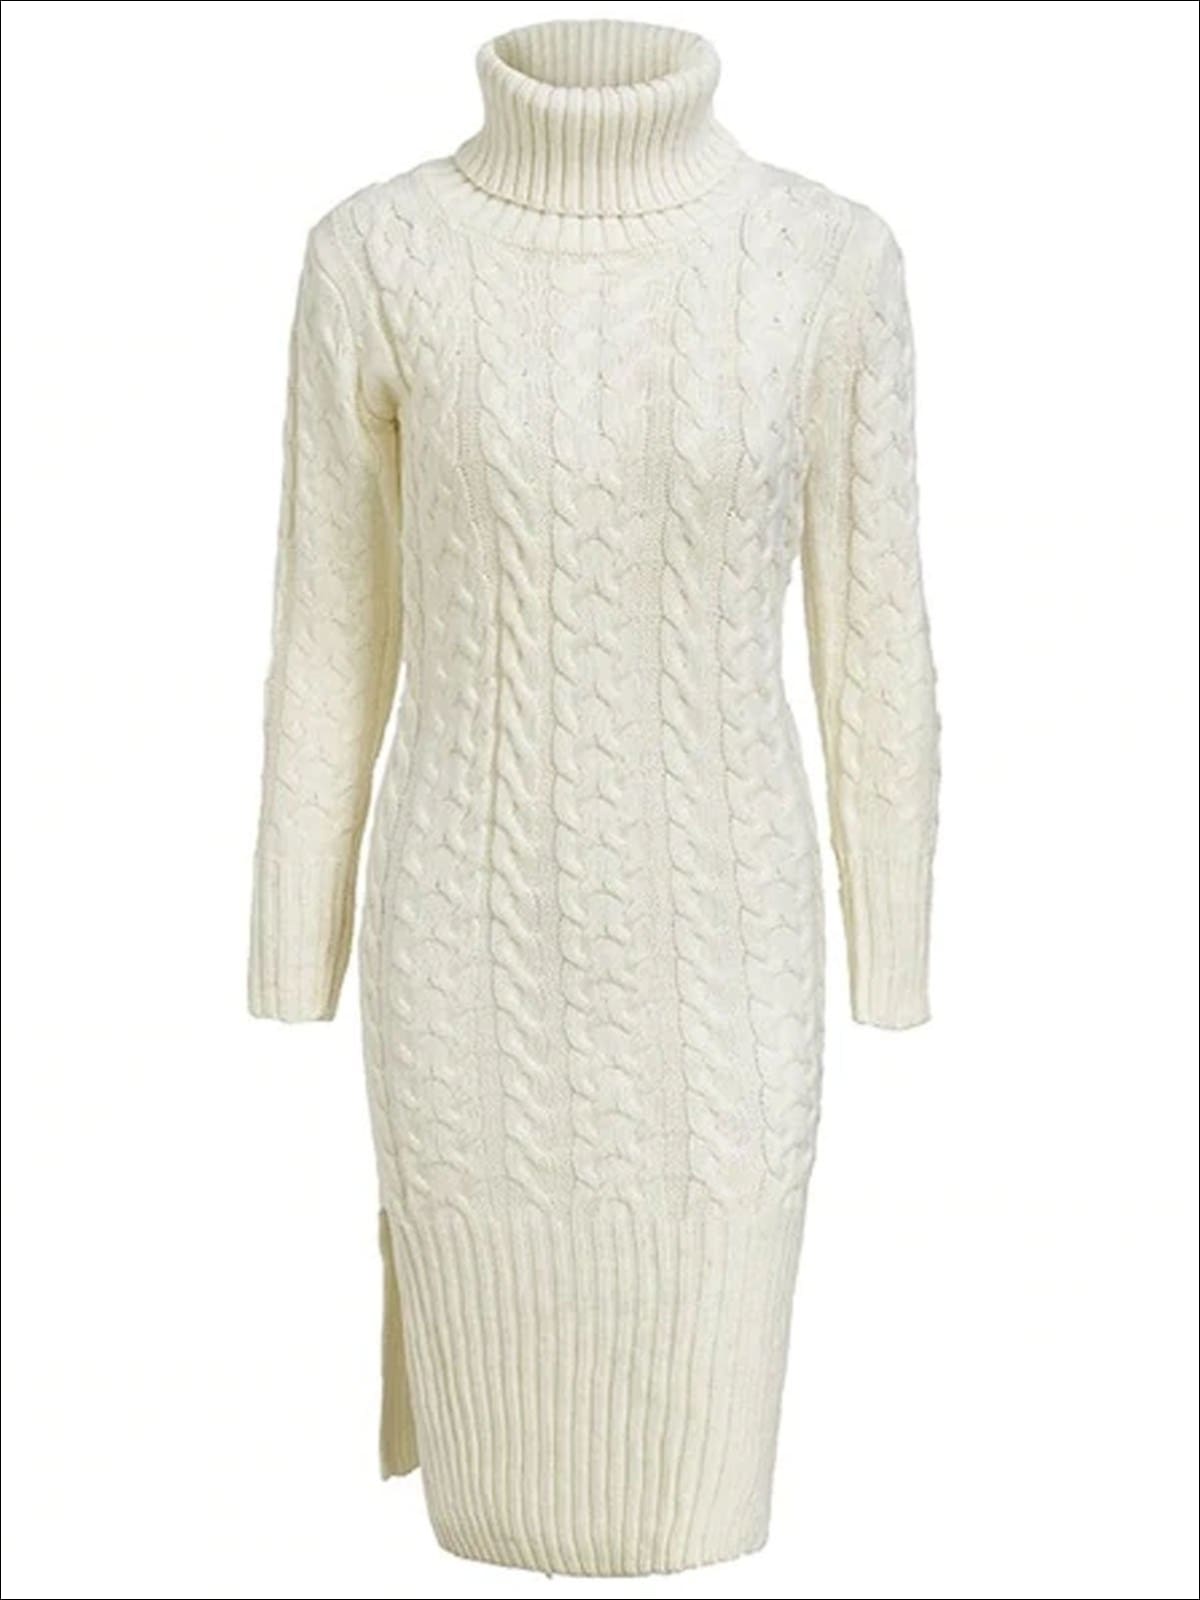 Womens Fall Cable Knit Turtleneck Sweater Dress - White / One Size - Womens Fall Dresses